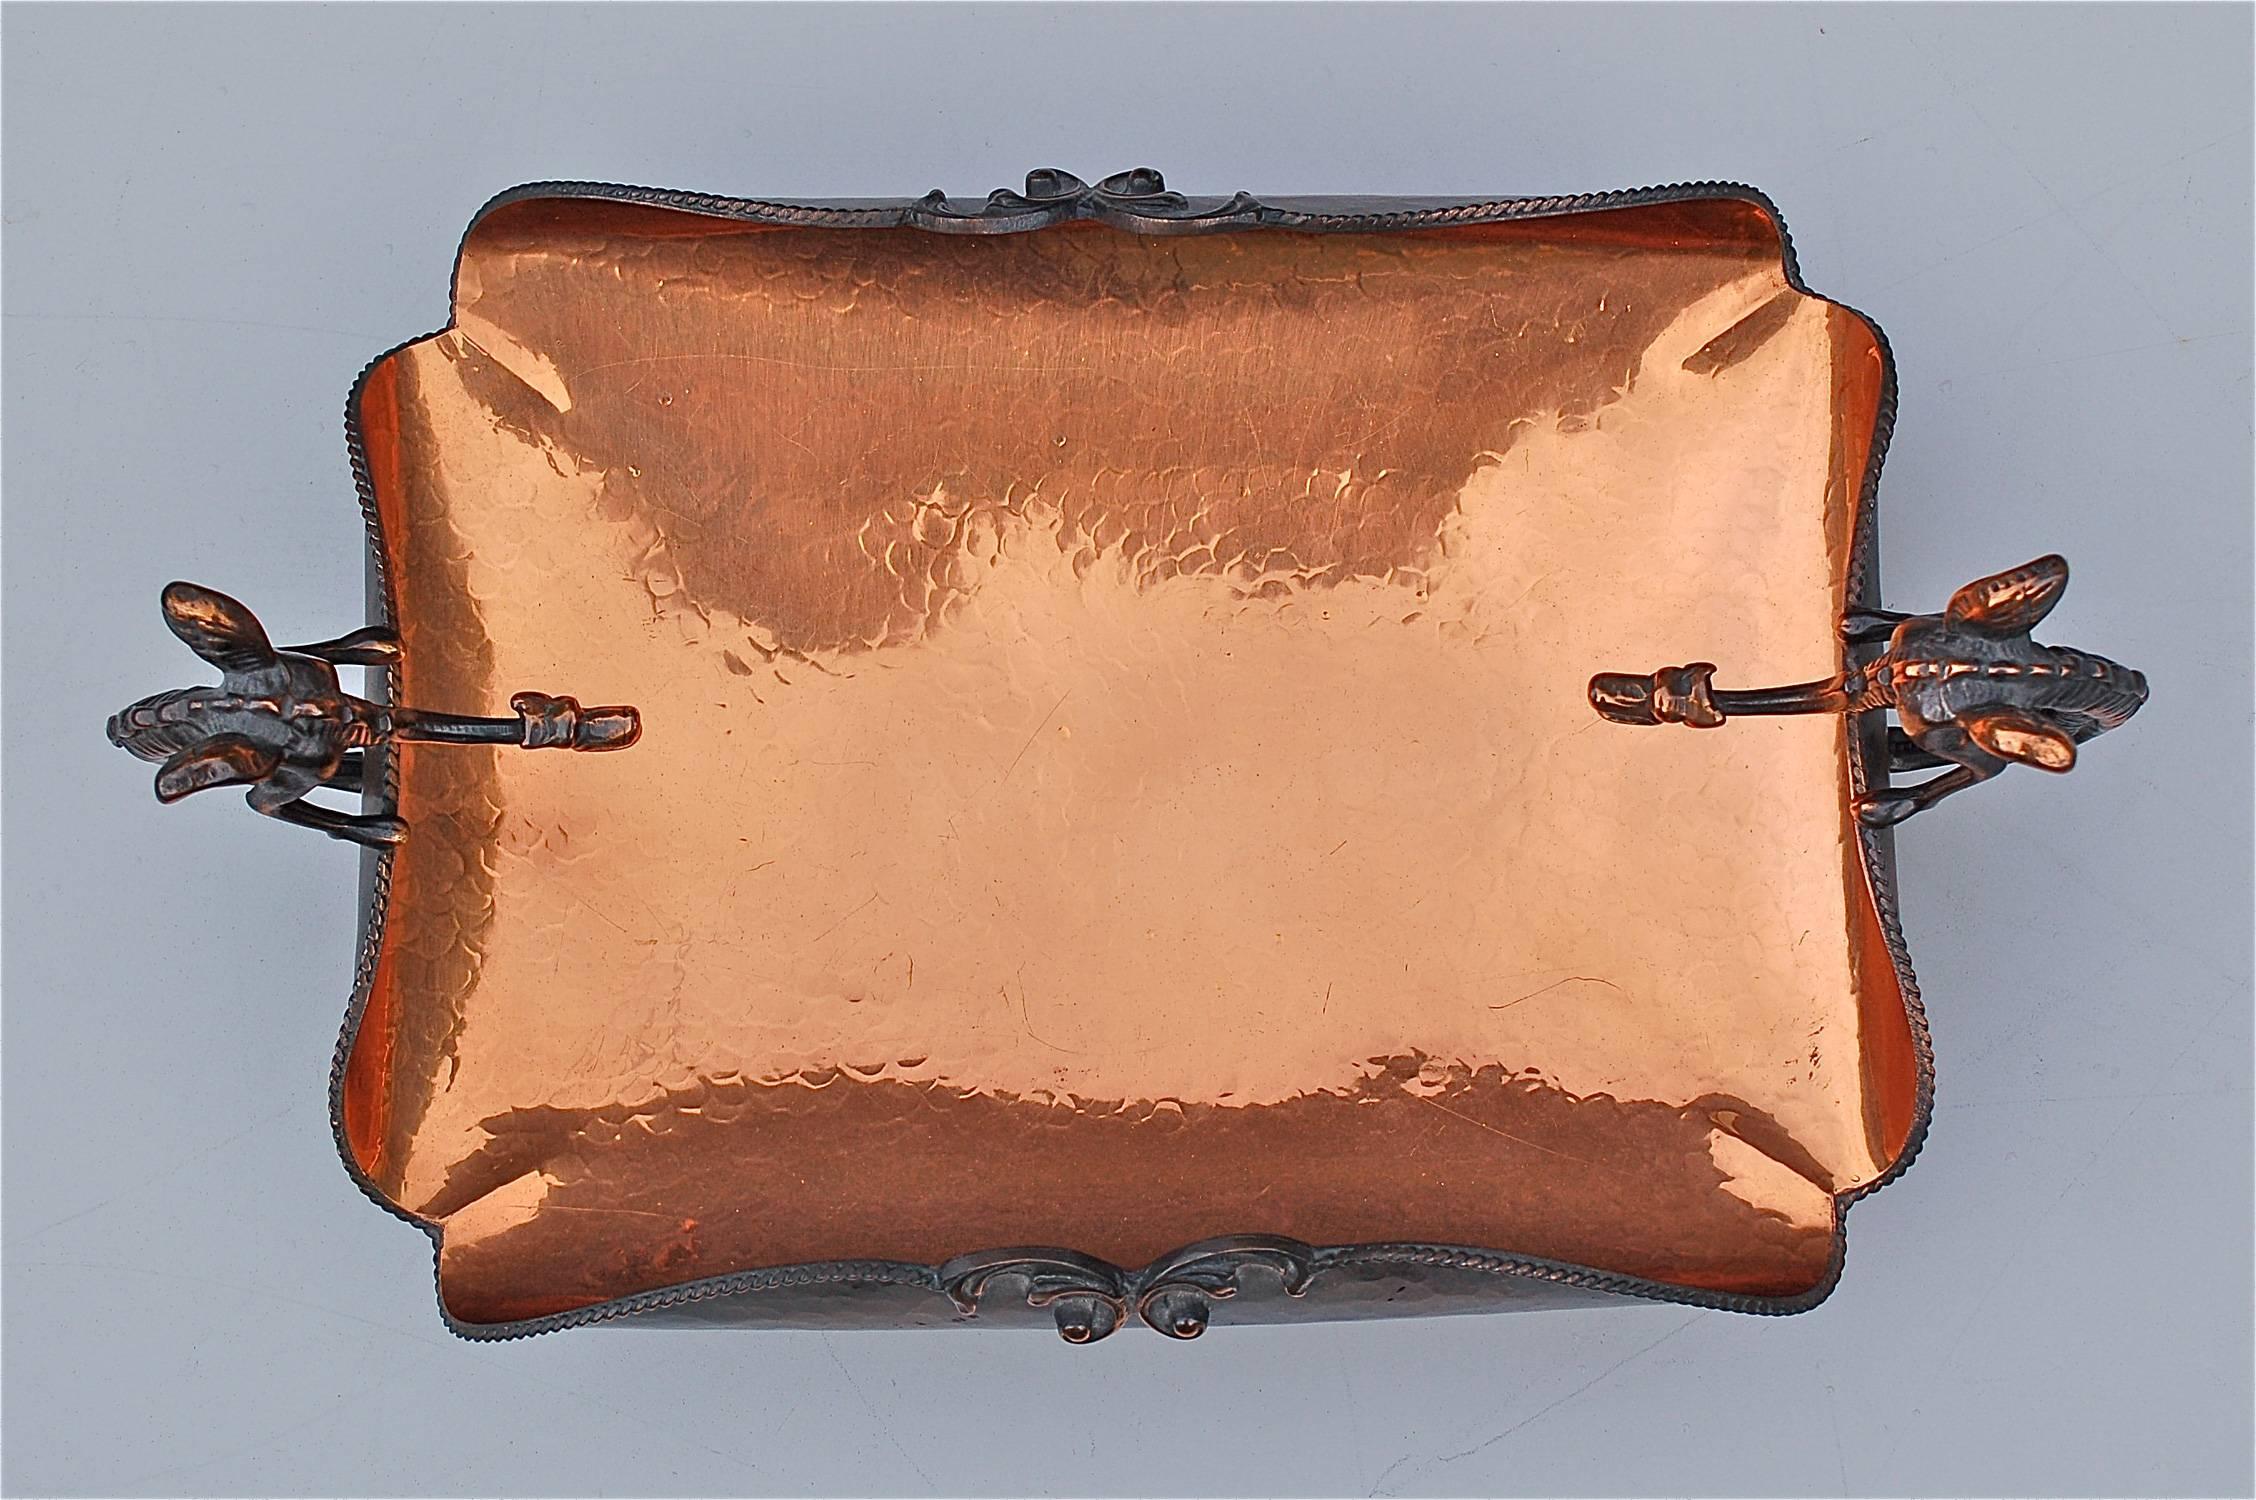 20th Century Delicately Hammered Copper Dish with Dragon Handles, circa 1950s